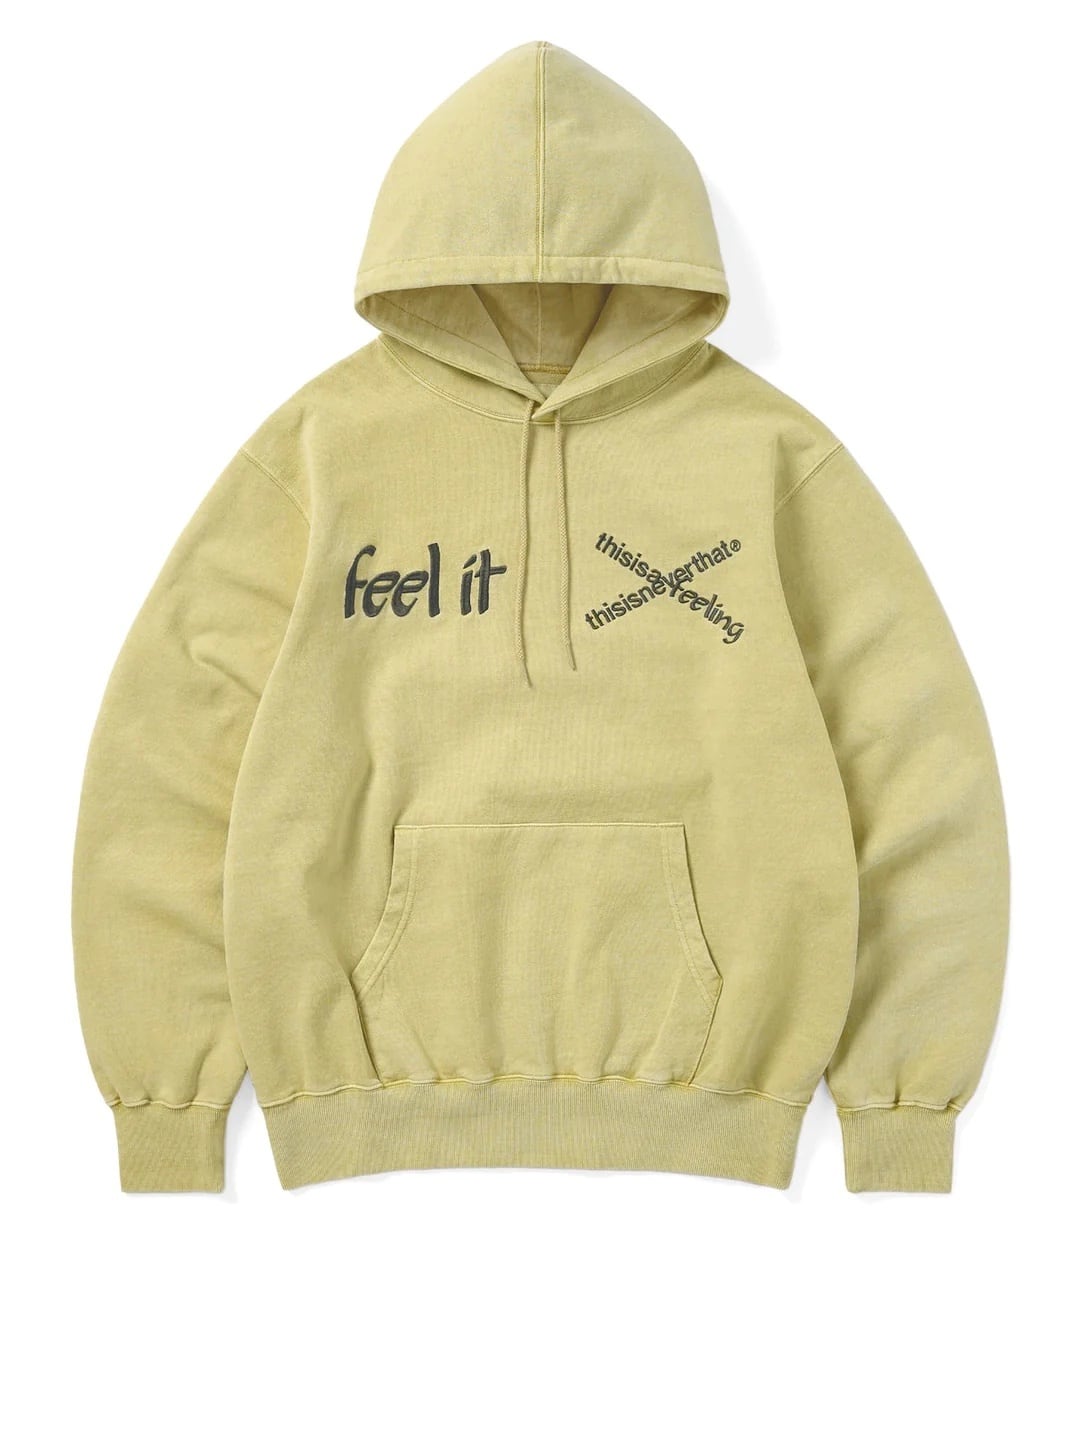 thisisneverthat TNT PR “Feel It” Hoodie - (Faded Yellow ...